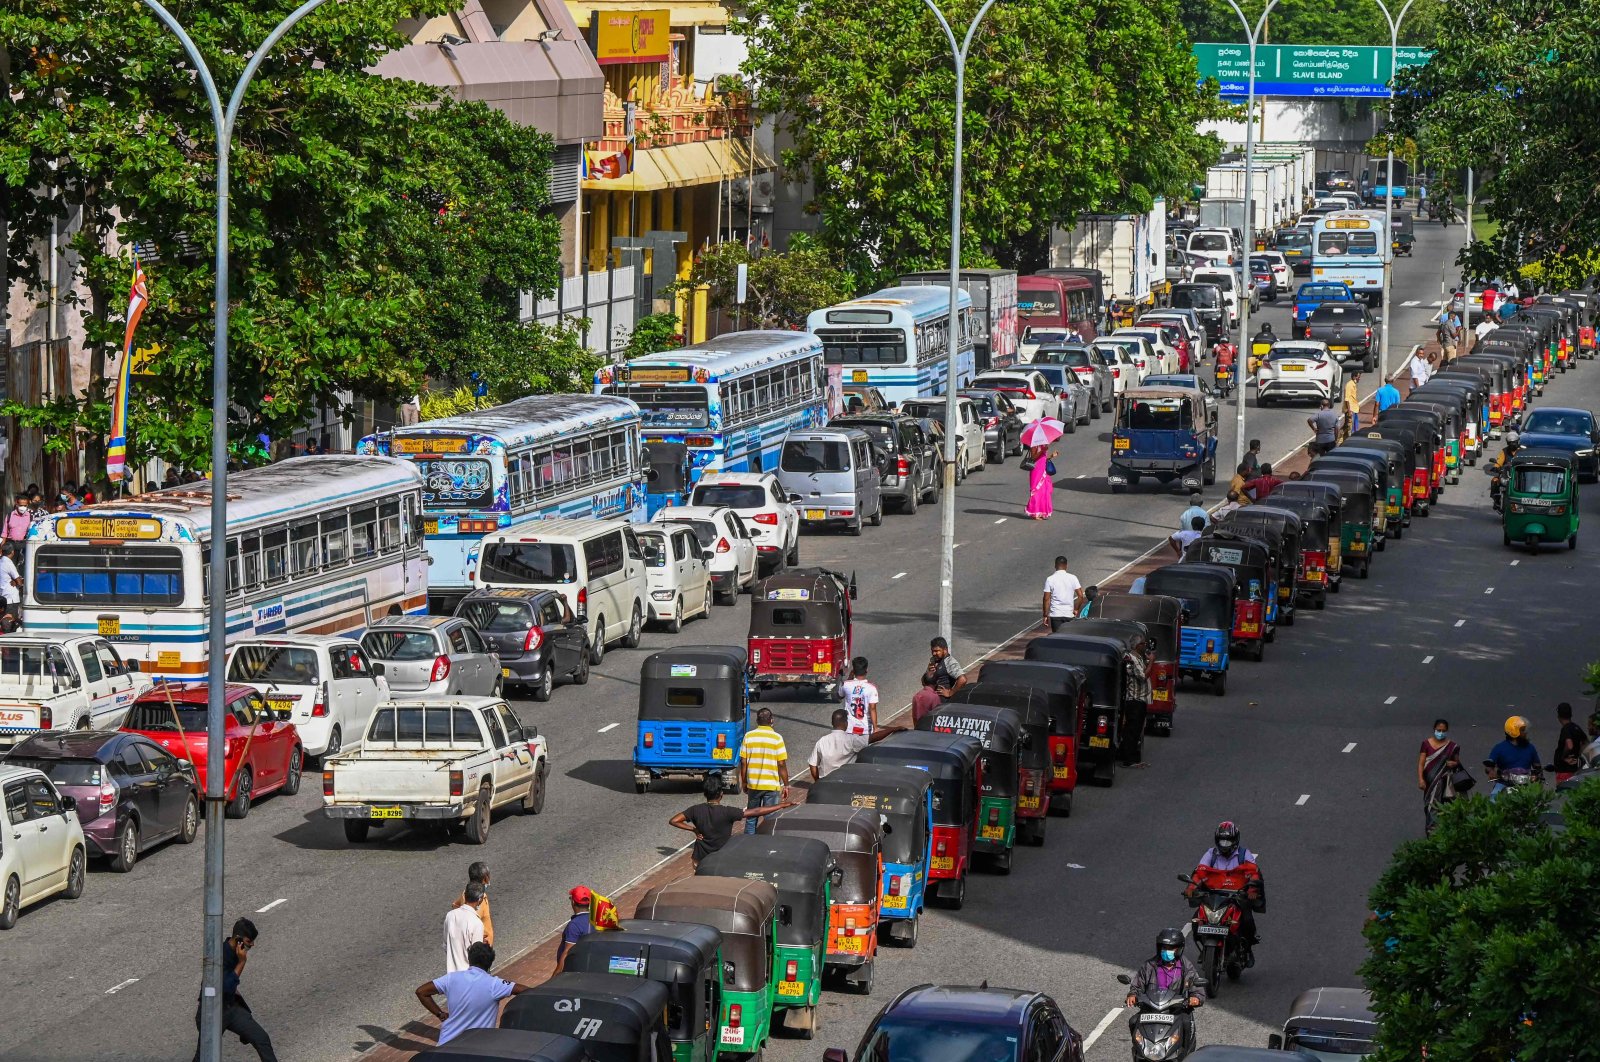 Motorists line up along a street to buy fuel at the Ceylon petroleum corporation fuel station in Colombo, Sri Lanka, May 18, 2022. (AFP Photo)